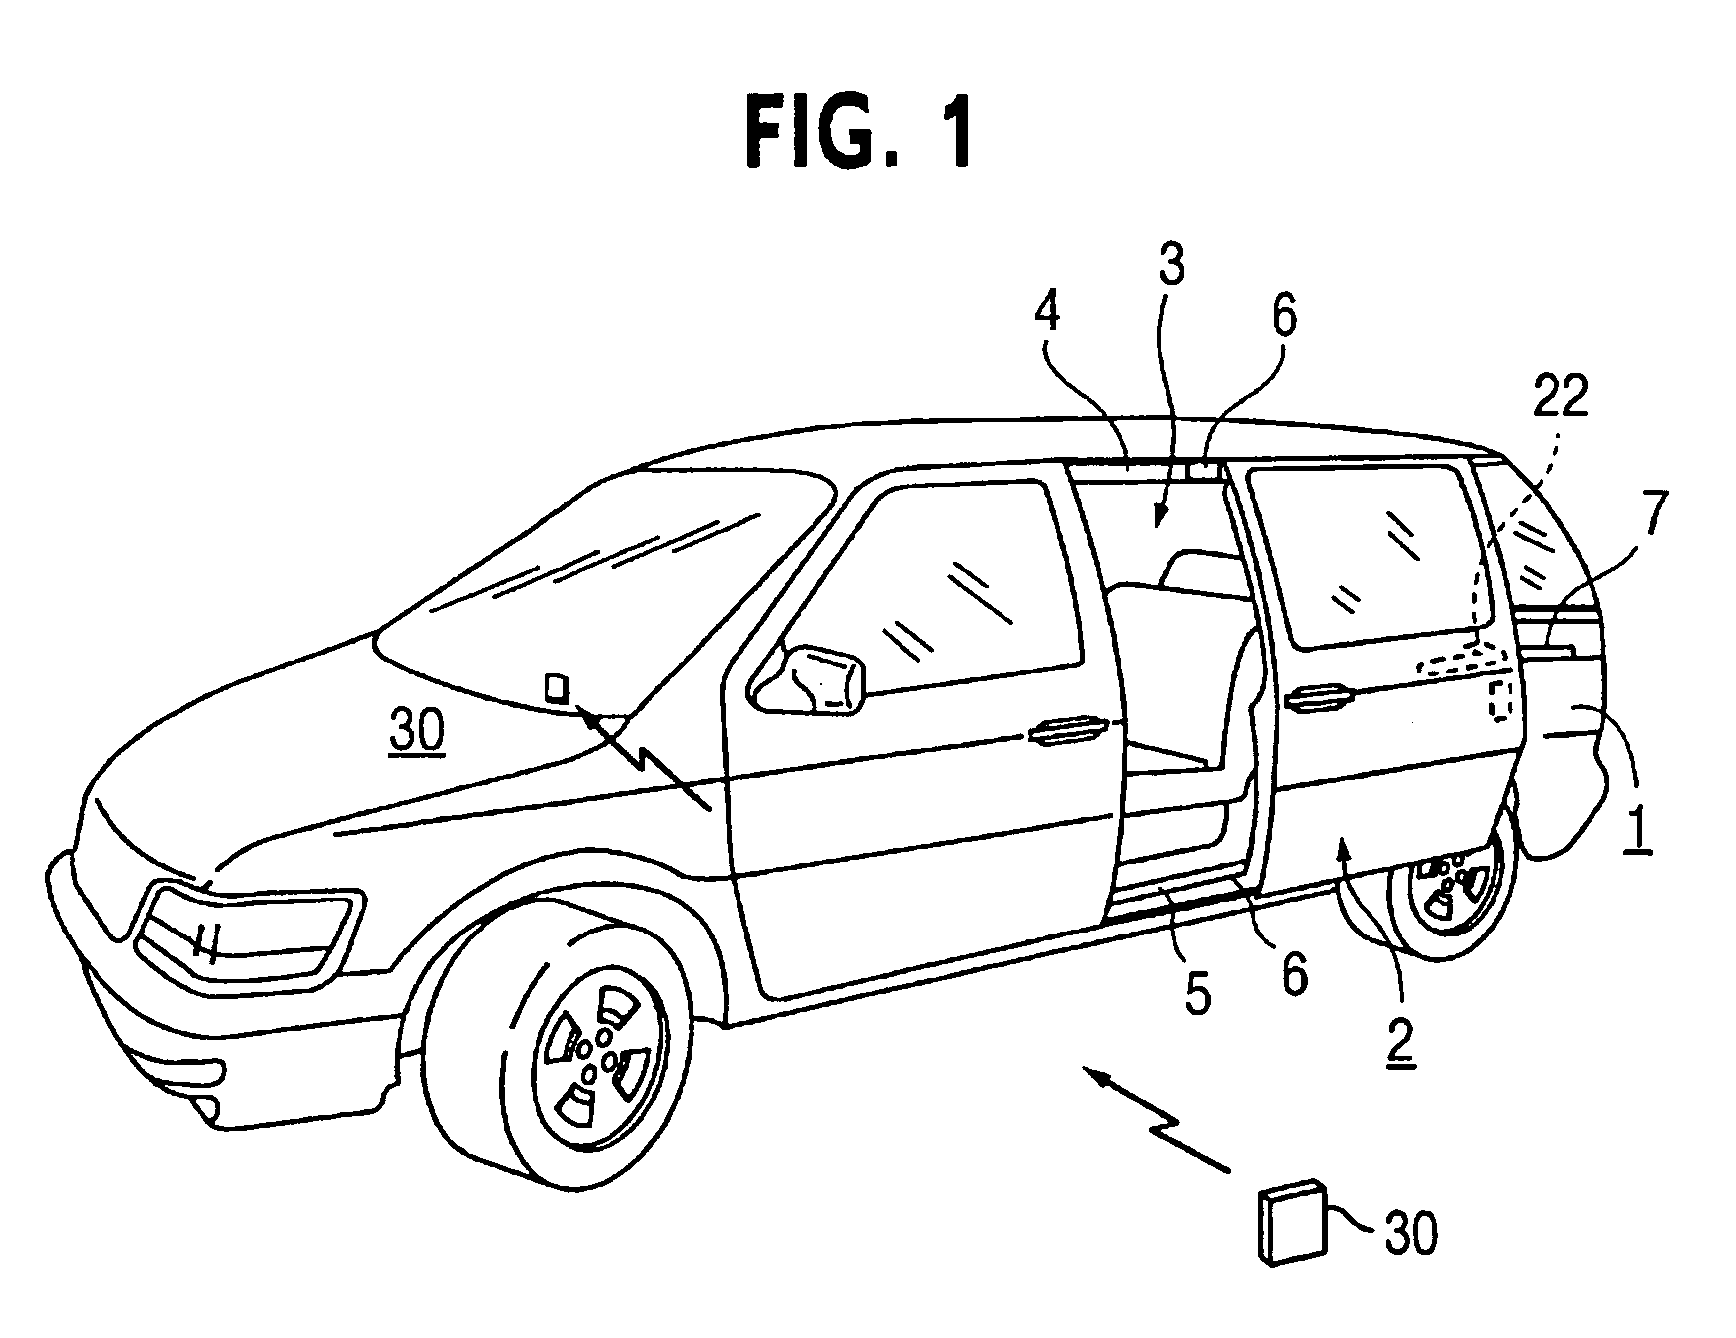 Device for automatically controlling opening and closing of a vehicle slide door